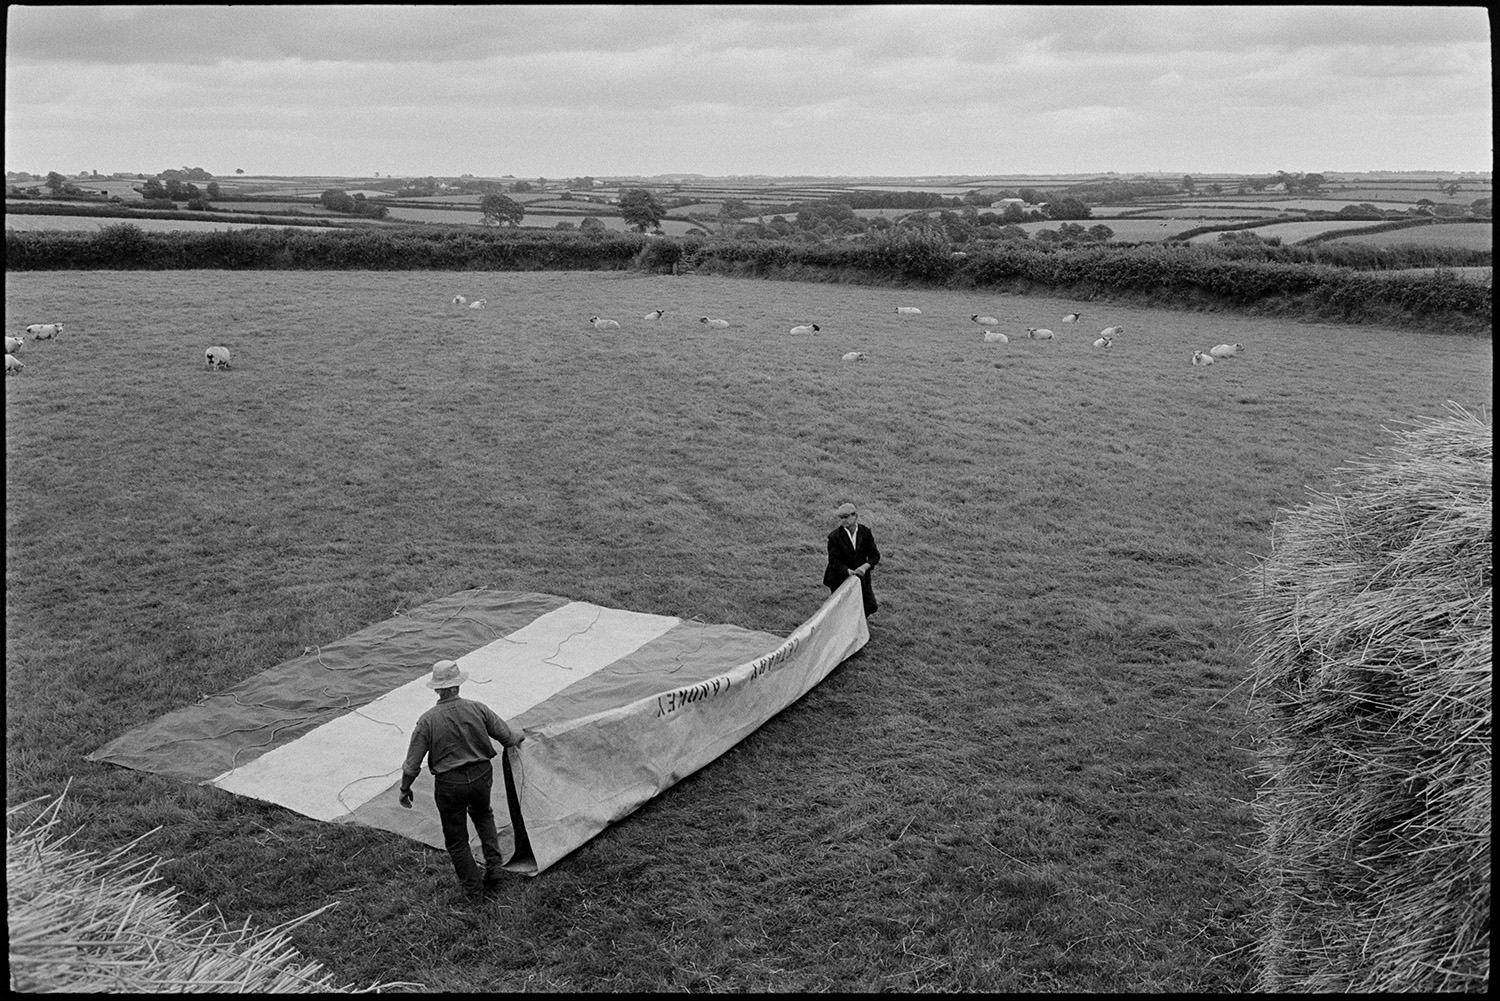 Farmers building wheat rick, view on top of rick. Folding tarpaulin.
[Two men, possibly from the Middleton family, in a large field with sheep folding a tarpaulin used while building a wheat rick at Westacott, Riddlecombe. Distant views of fields, hedges and trees can be seen in the background.]